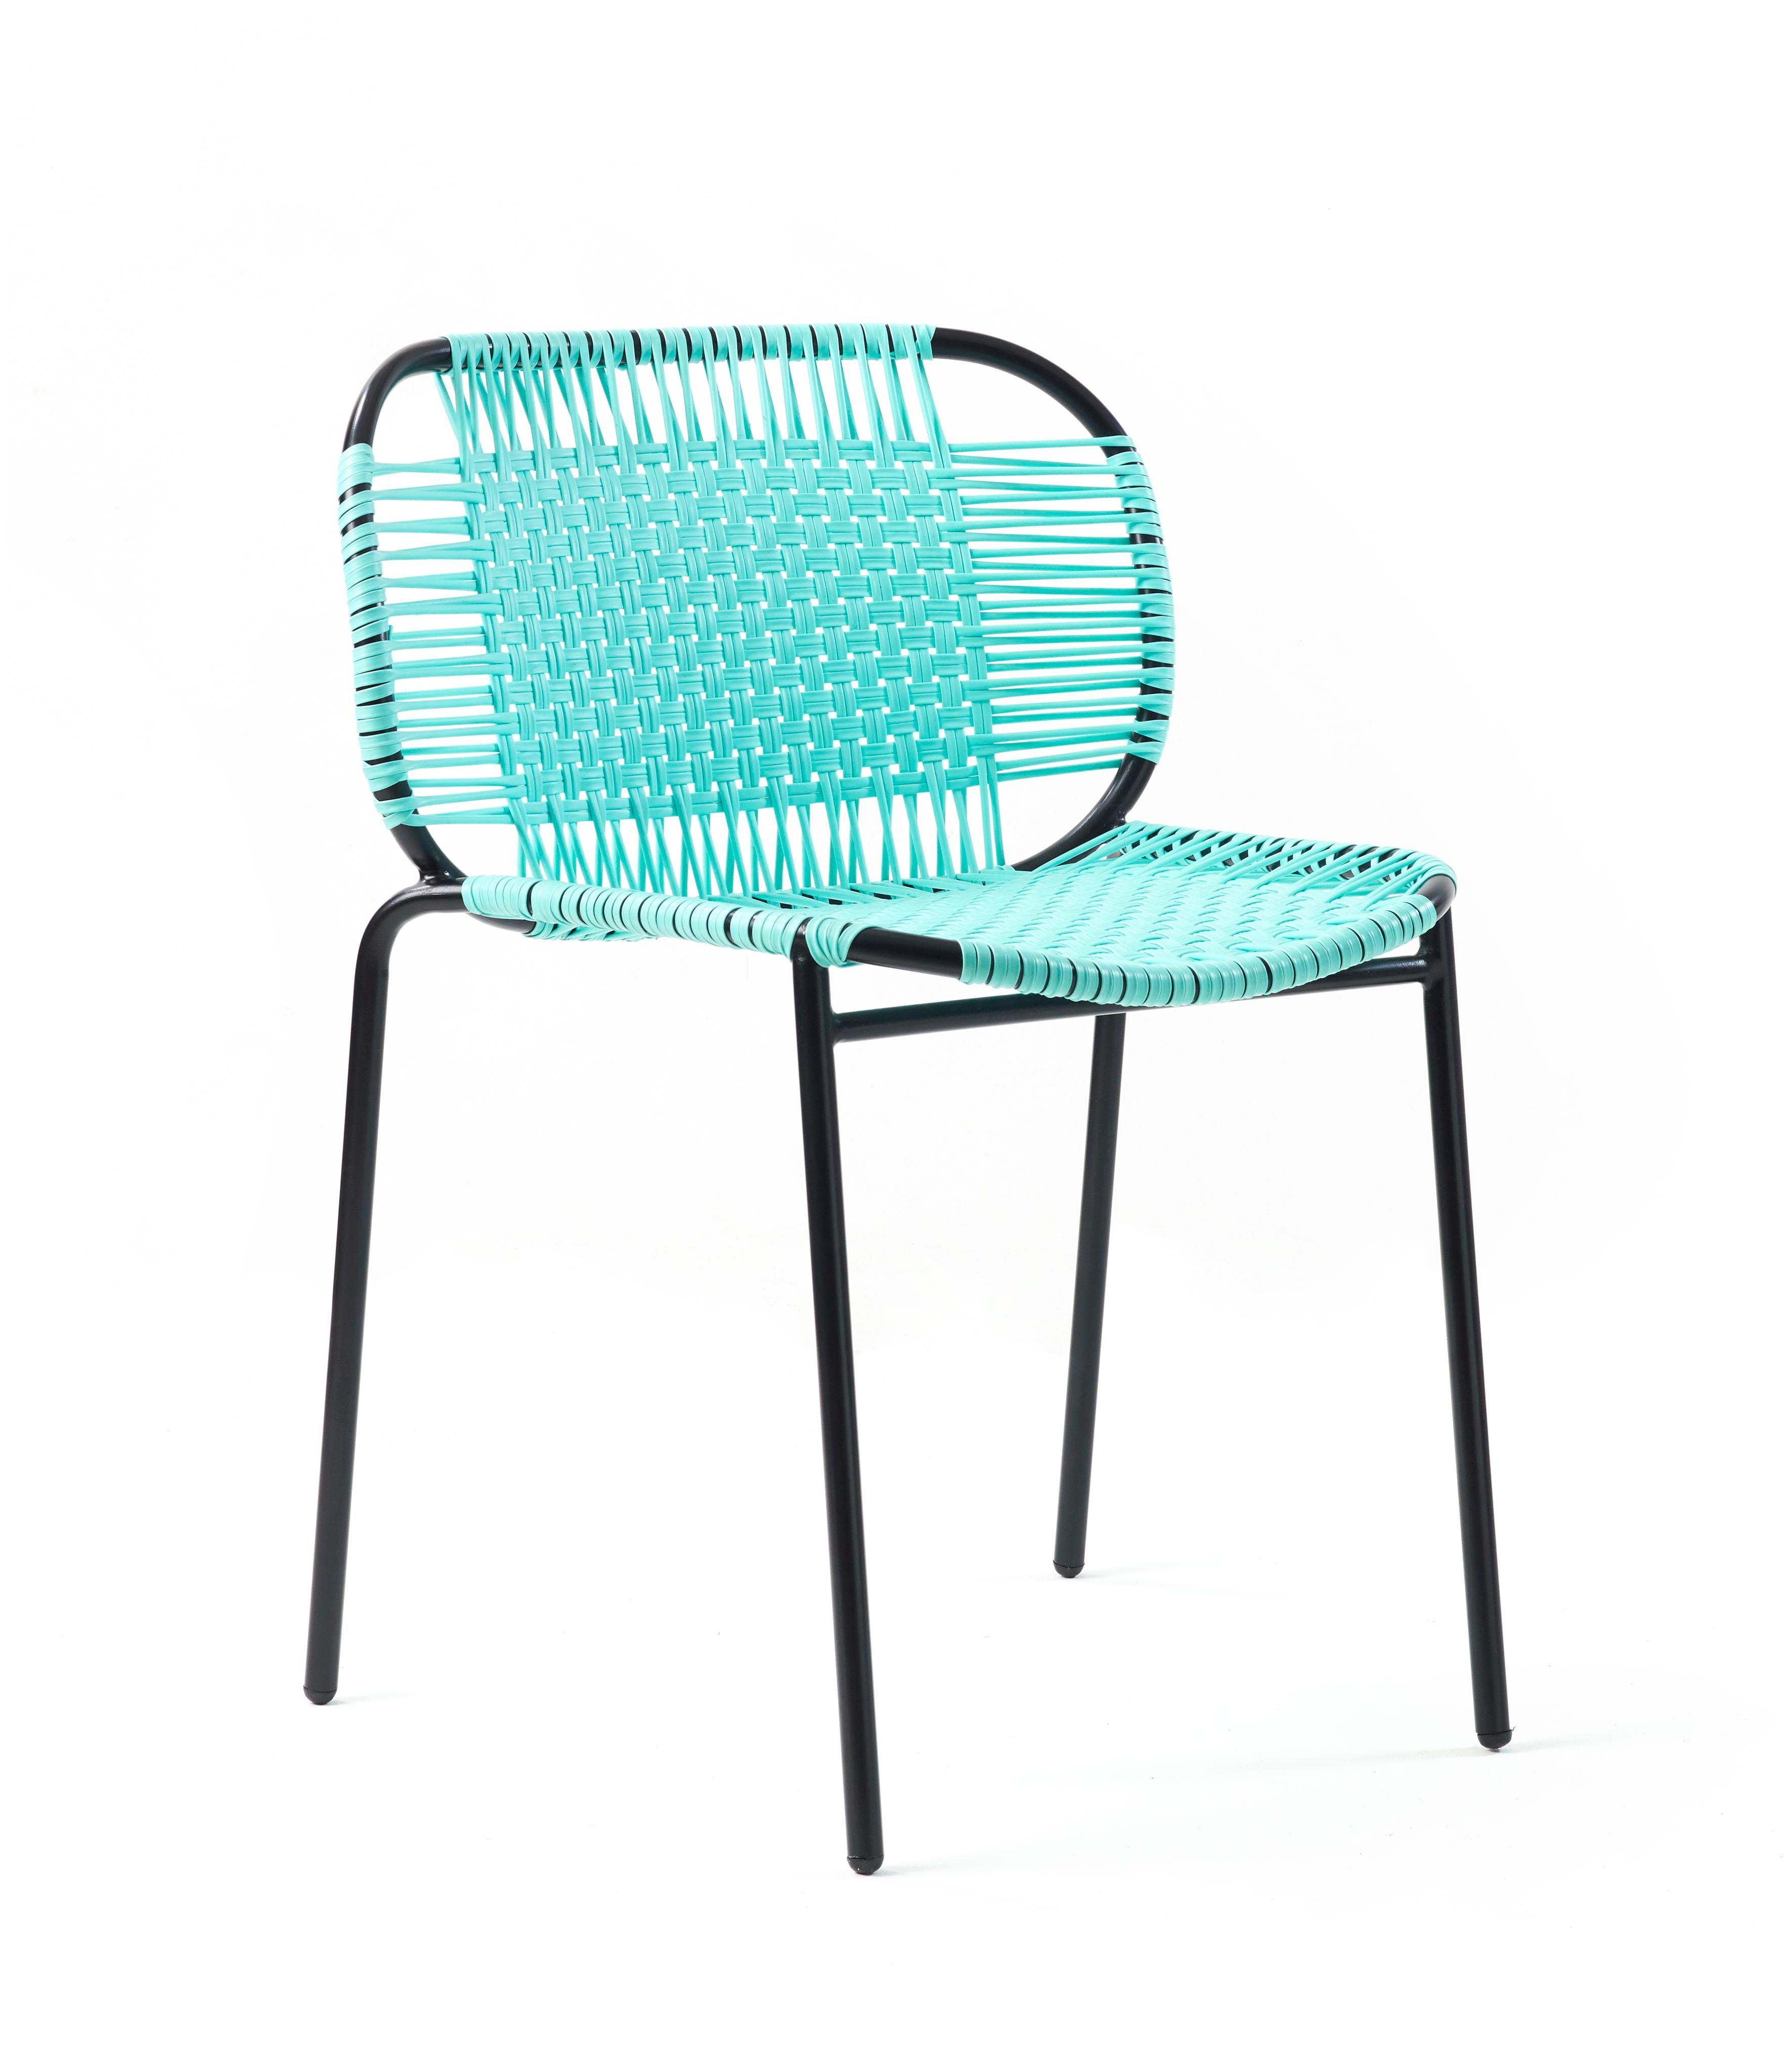 Mint cielo stacking chair by Sebastian Herkner
Materials: PVC strings, powder-coated steel frame.
Technique: Made from recycled plastic and weaved by local craftspeople in cartagena, colombia.
Dimensions: W 56 x D 51.4 x H 78 cm
Also available